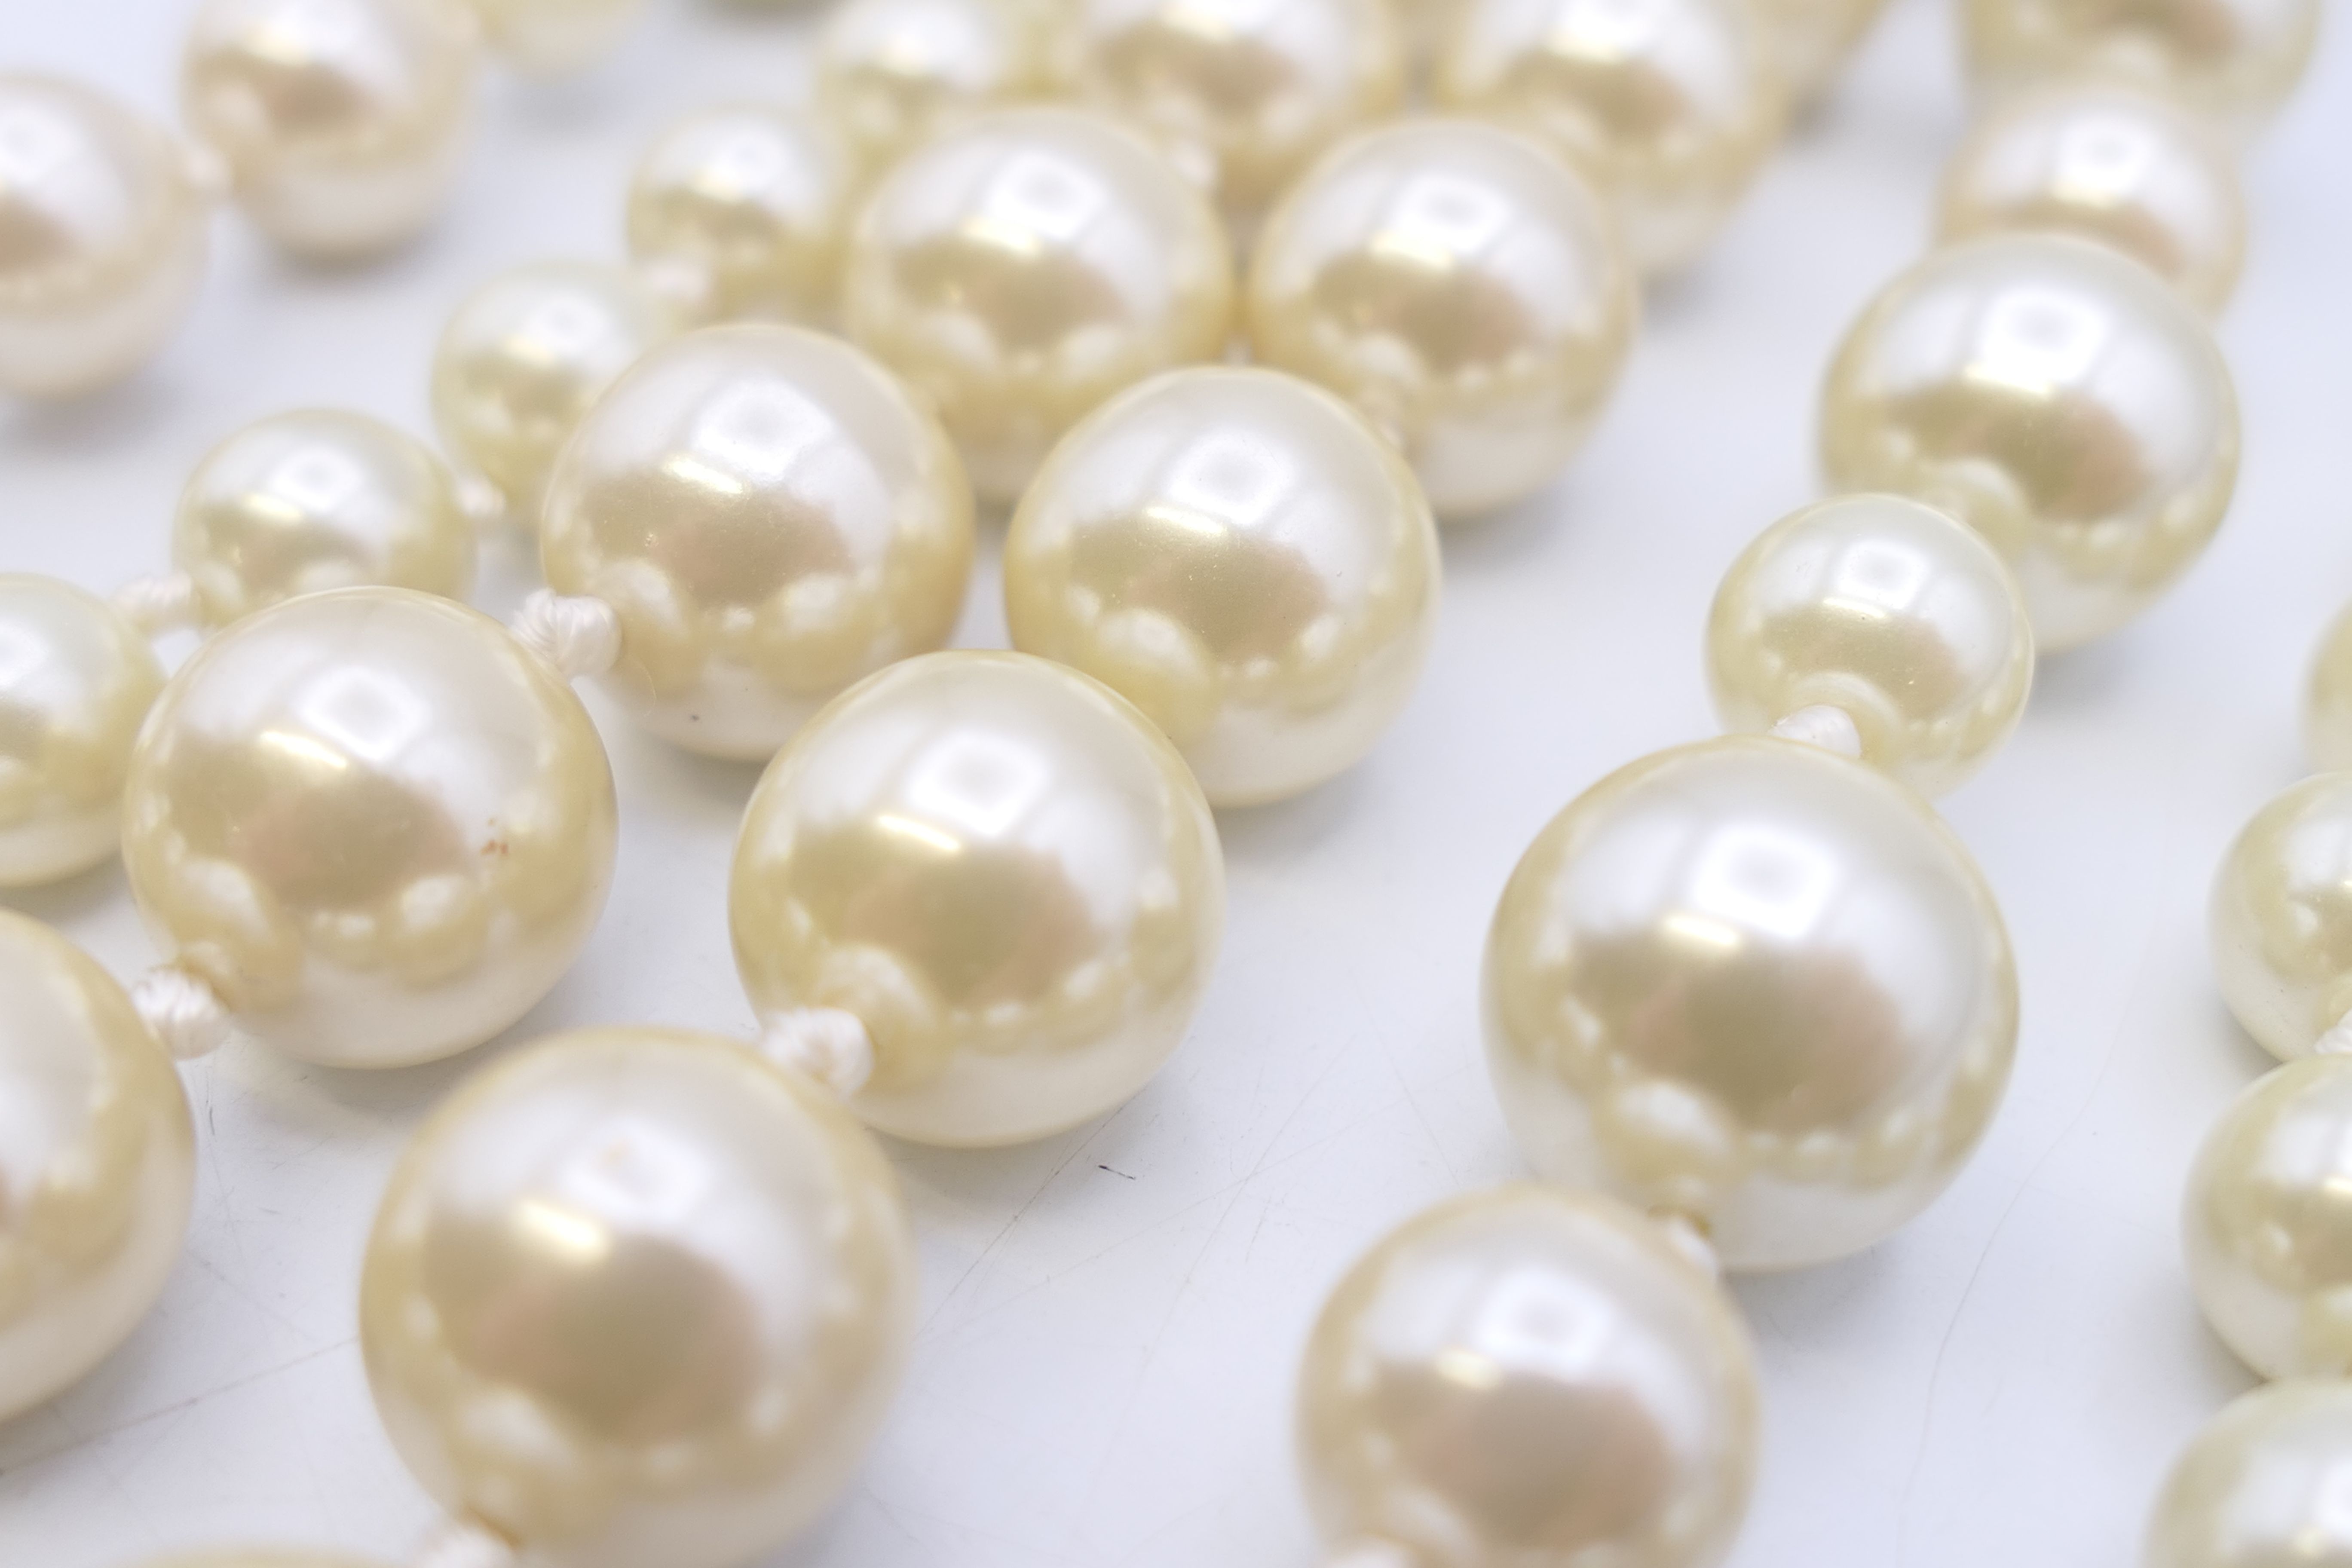 A Stellar & Dot designer pearl necklace, another pearl necklace and a bracelet. - Image 7 of 11